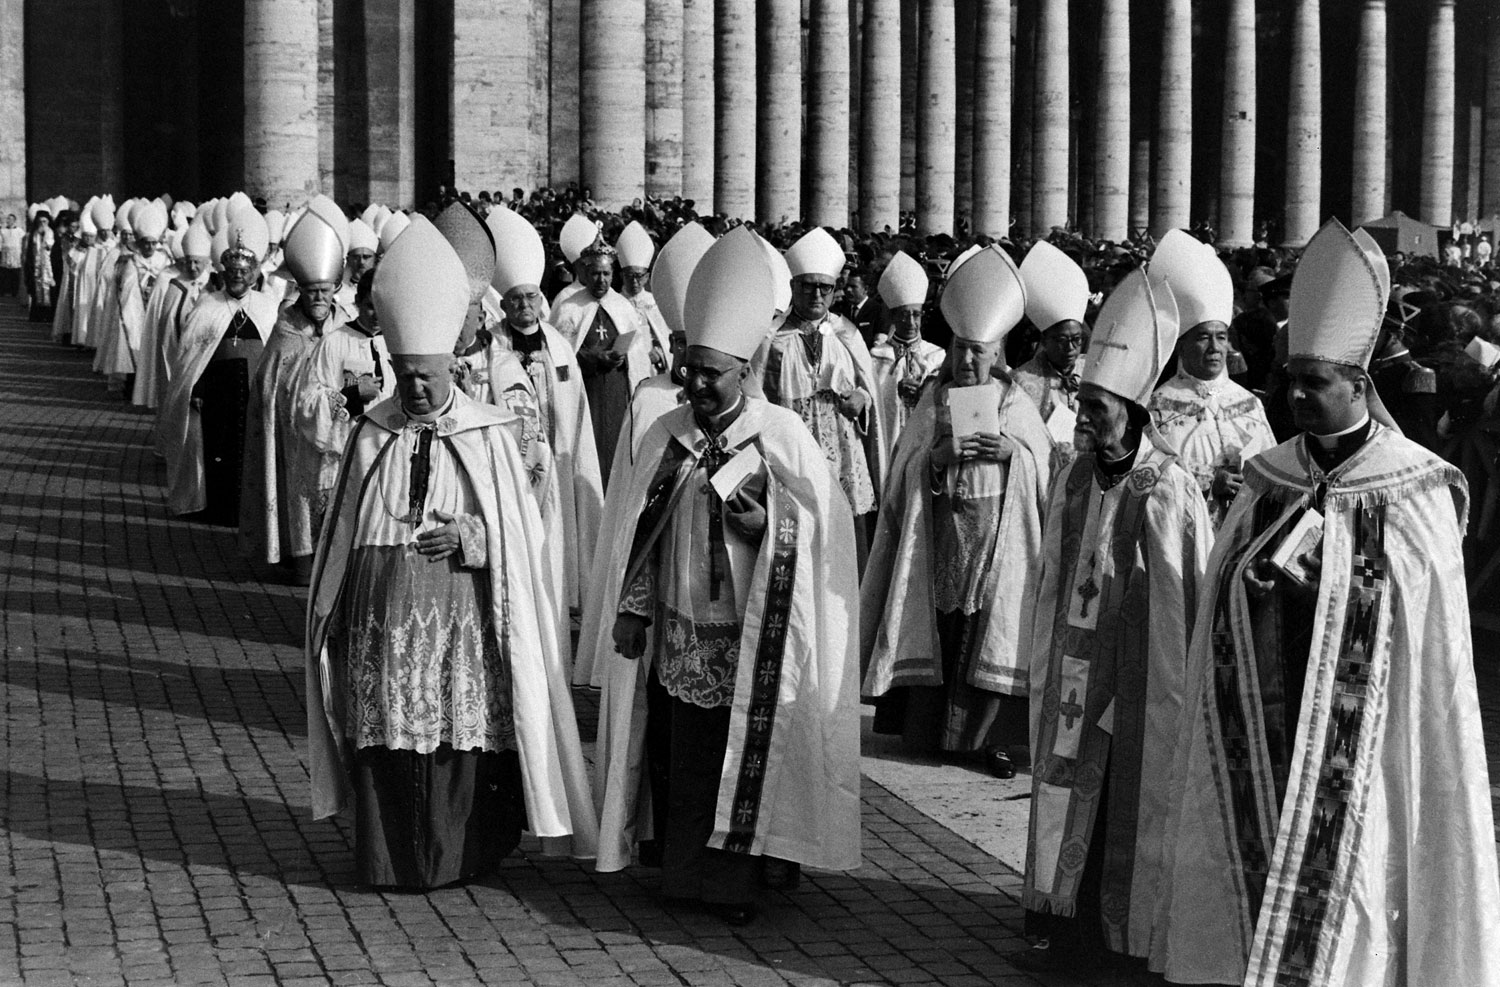 Vatican Ecumenical Council and Ecumenical Procession, Rome, 1962.